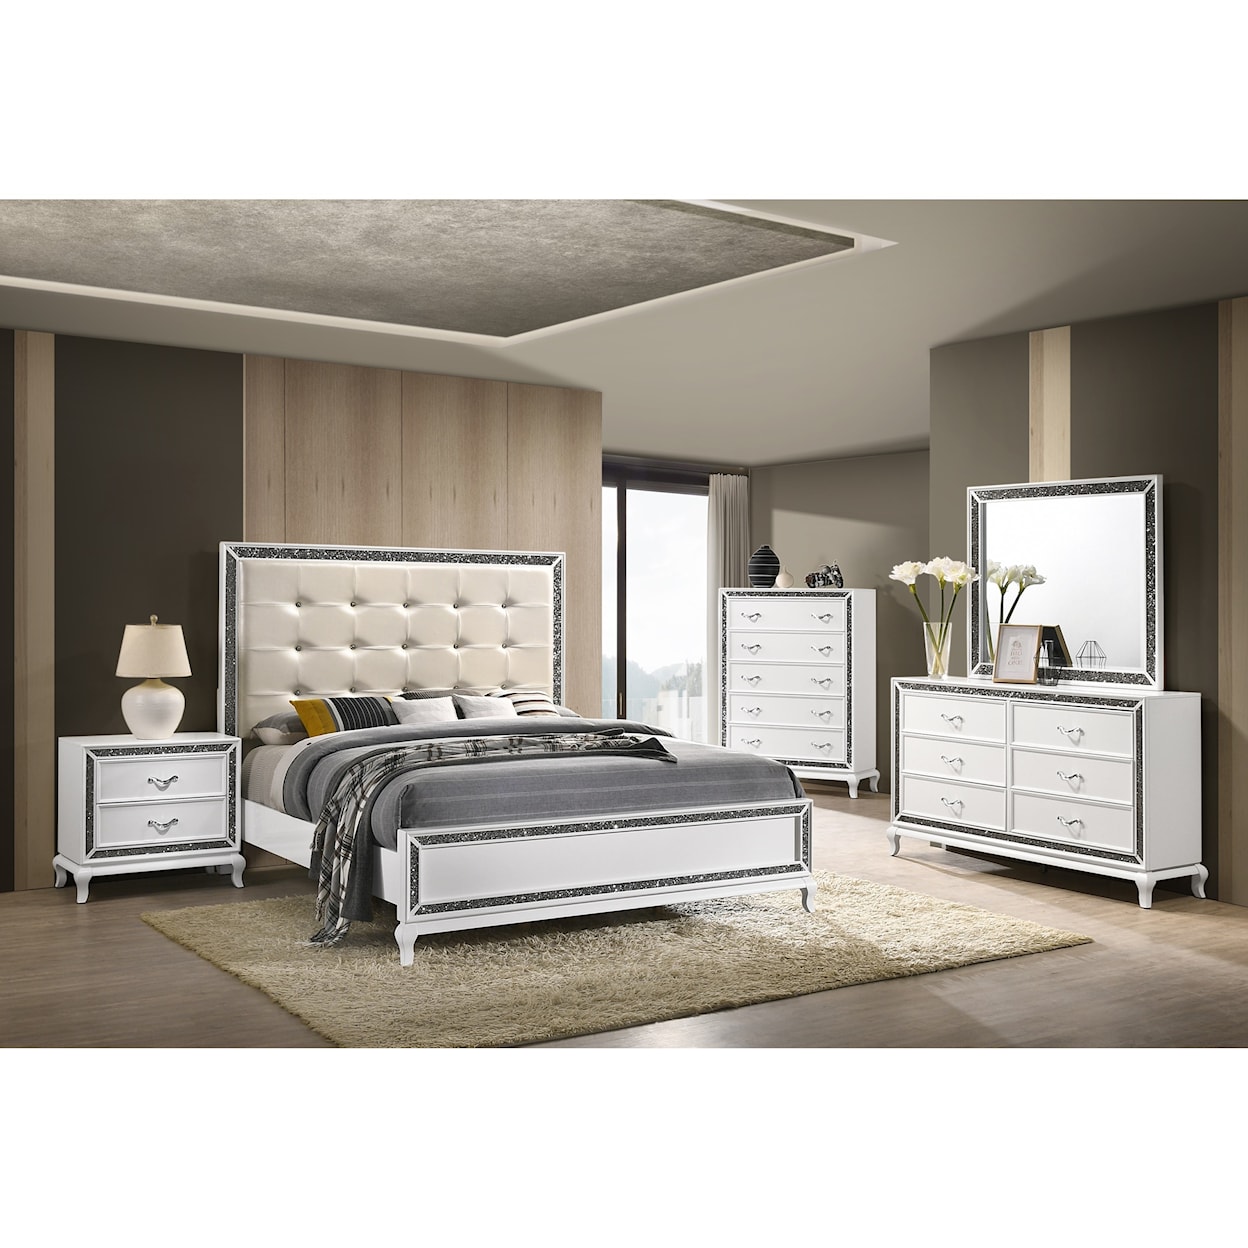 New Classic Furniture Park Imperial Twin Bedroom Group